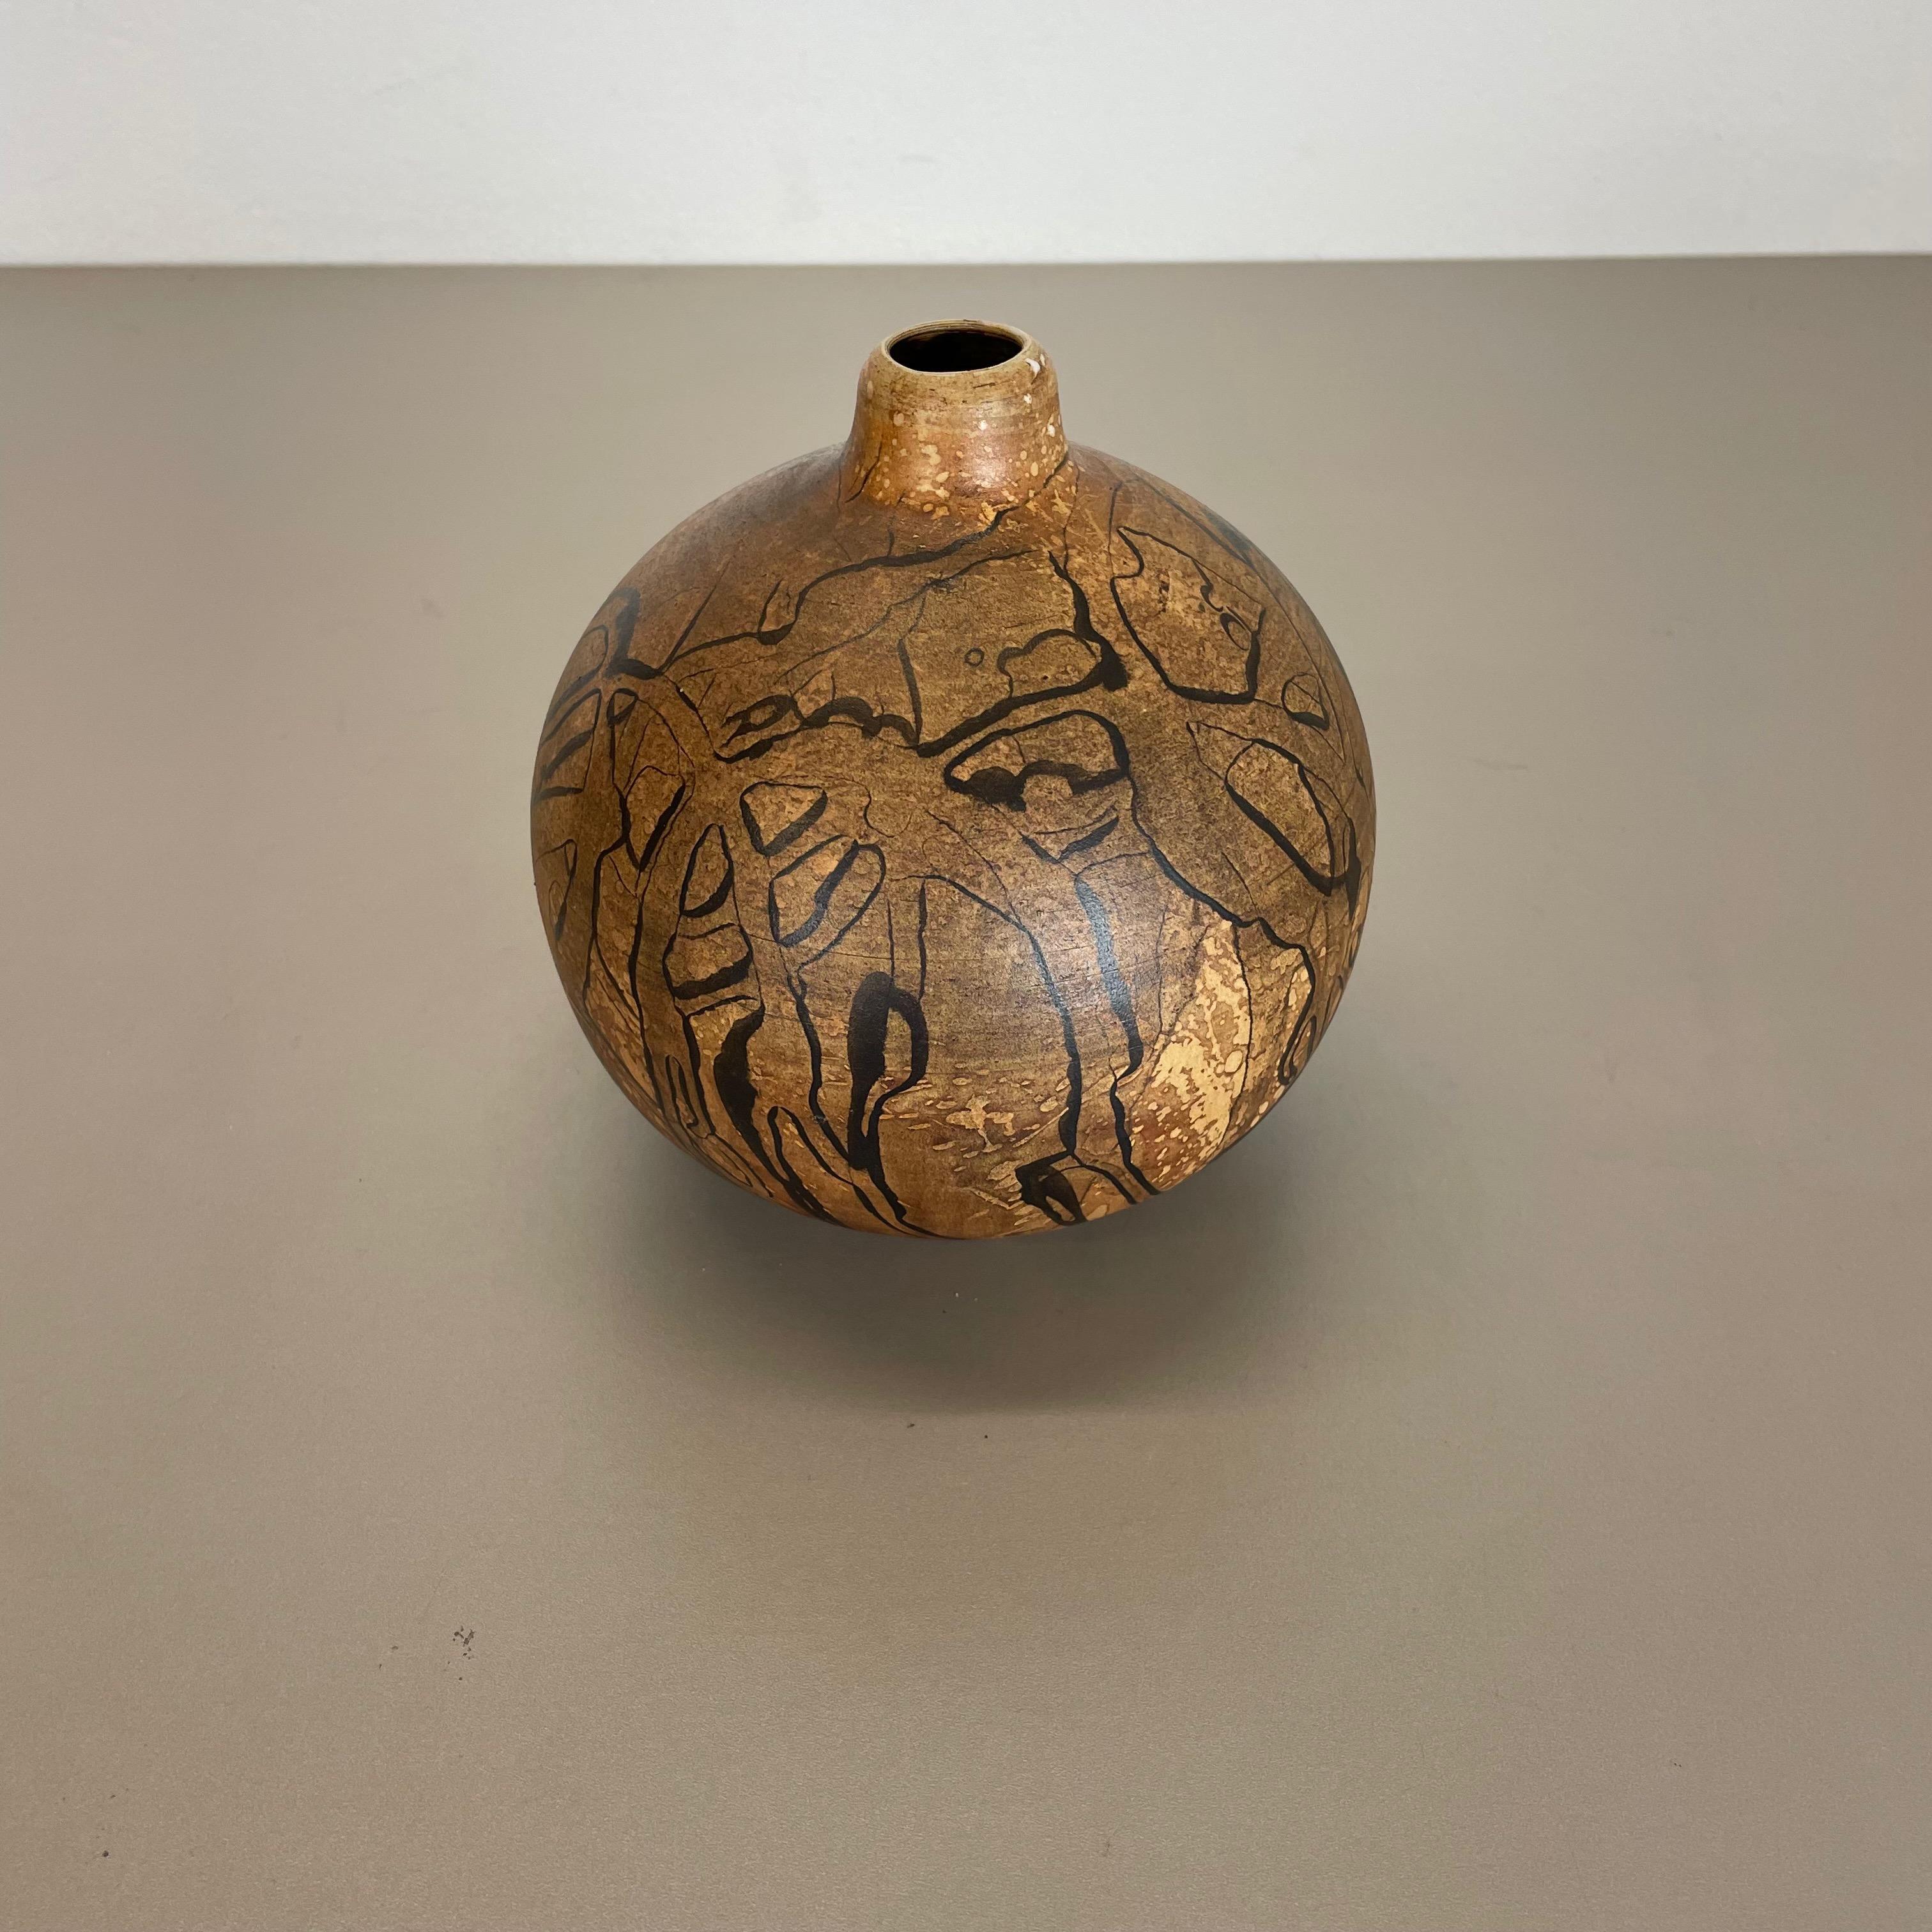 Mid-Century Modern Abstract Ceramic Studio Pottery Vase by Gerhard Liebenthron, Germany, 1970s For Sale